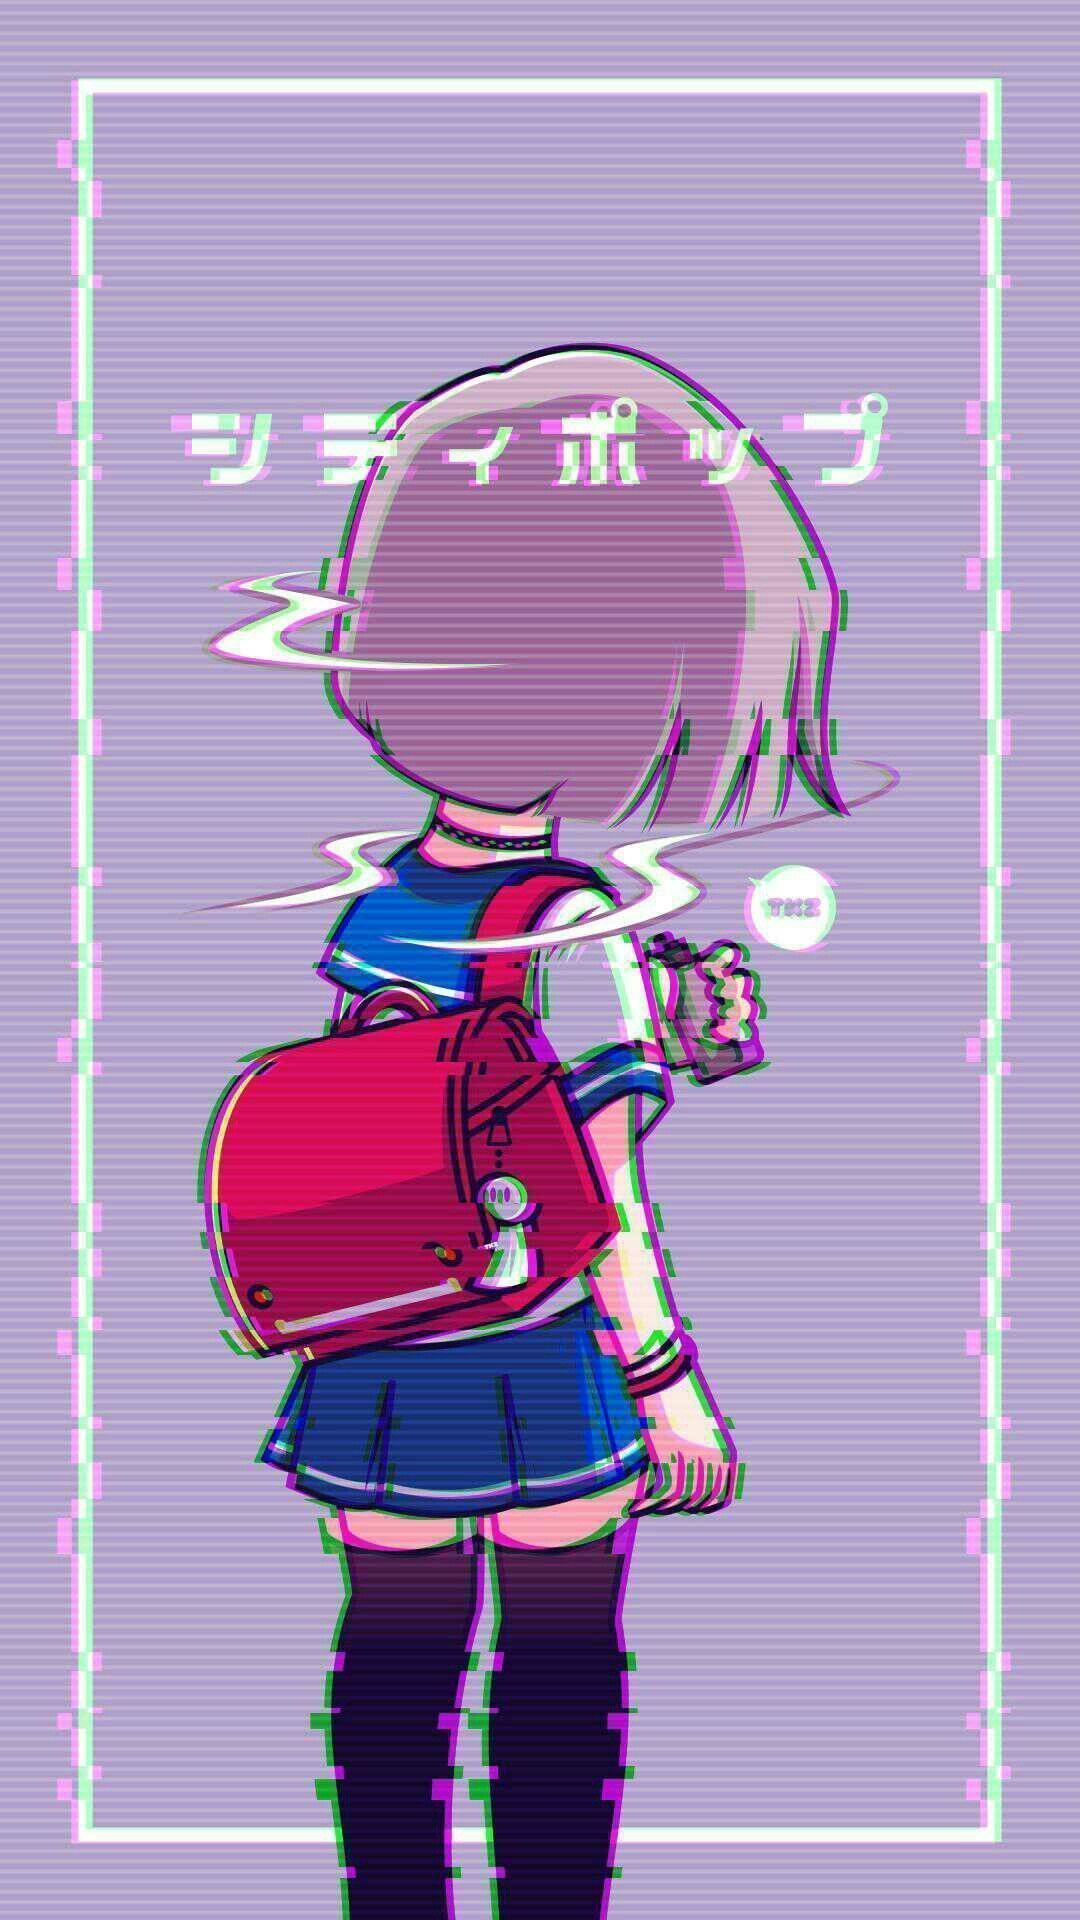 Aesthetic anime phone background with a girl in a school uniform - Gaming, arcade